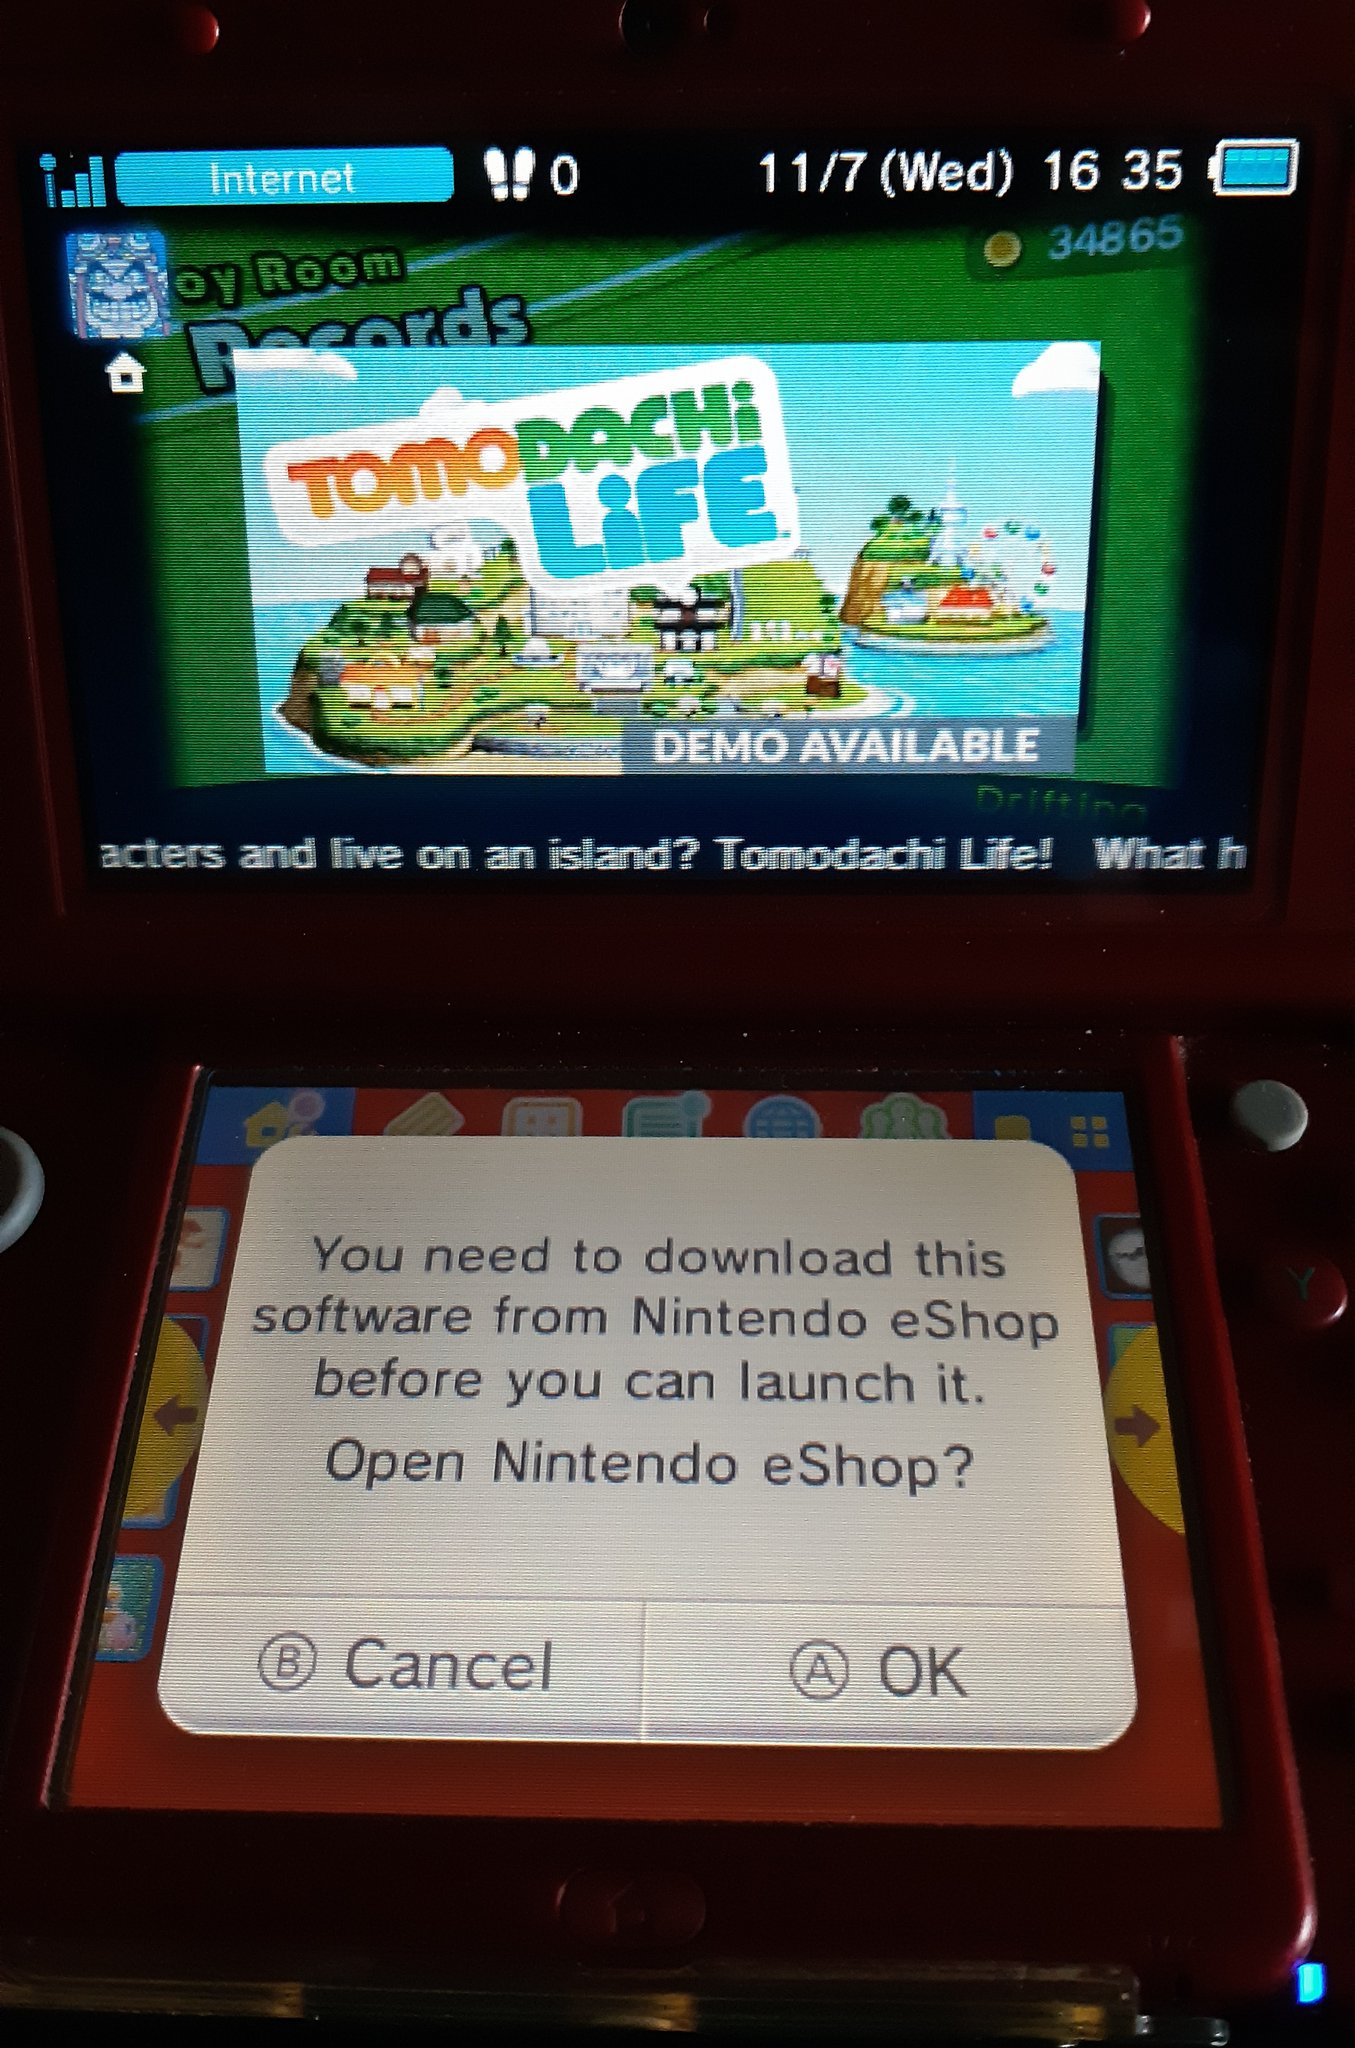 Akfamilyhome on Twitter: "Why did Nintendo just randomly send me a SpotPass download notification for Tomodachi https://t.co/W1JY9W7LAc" / Twitter